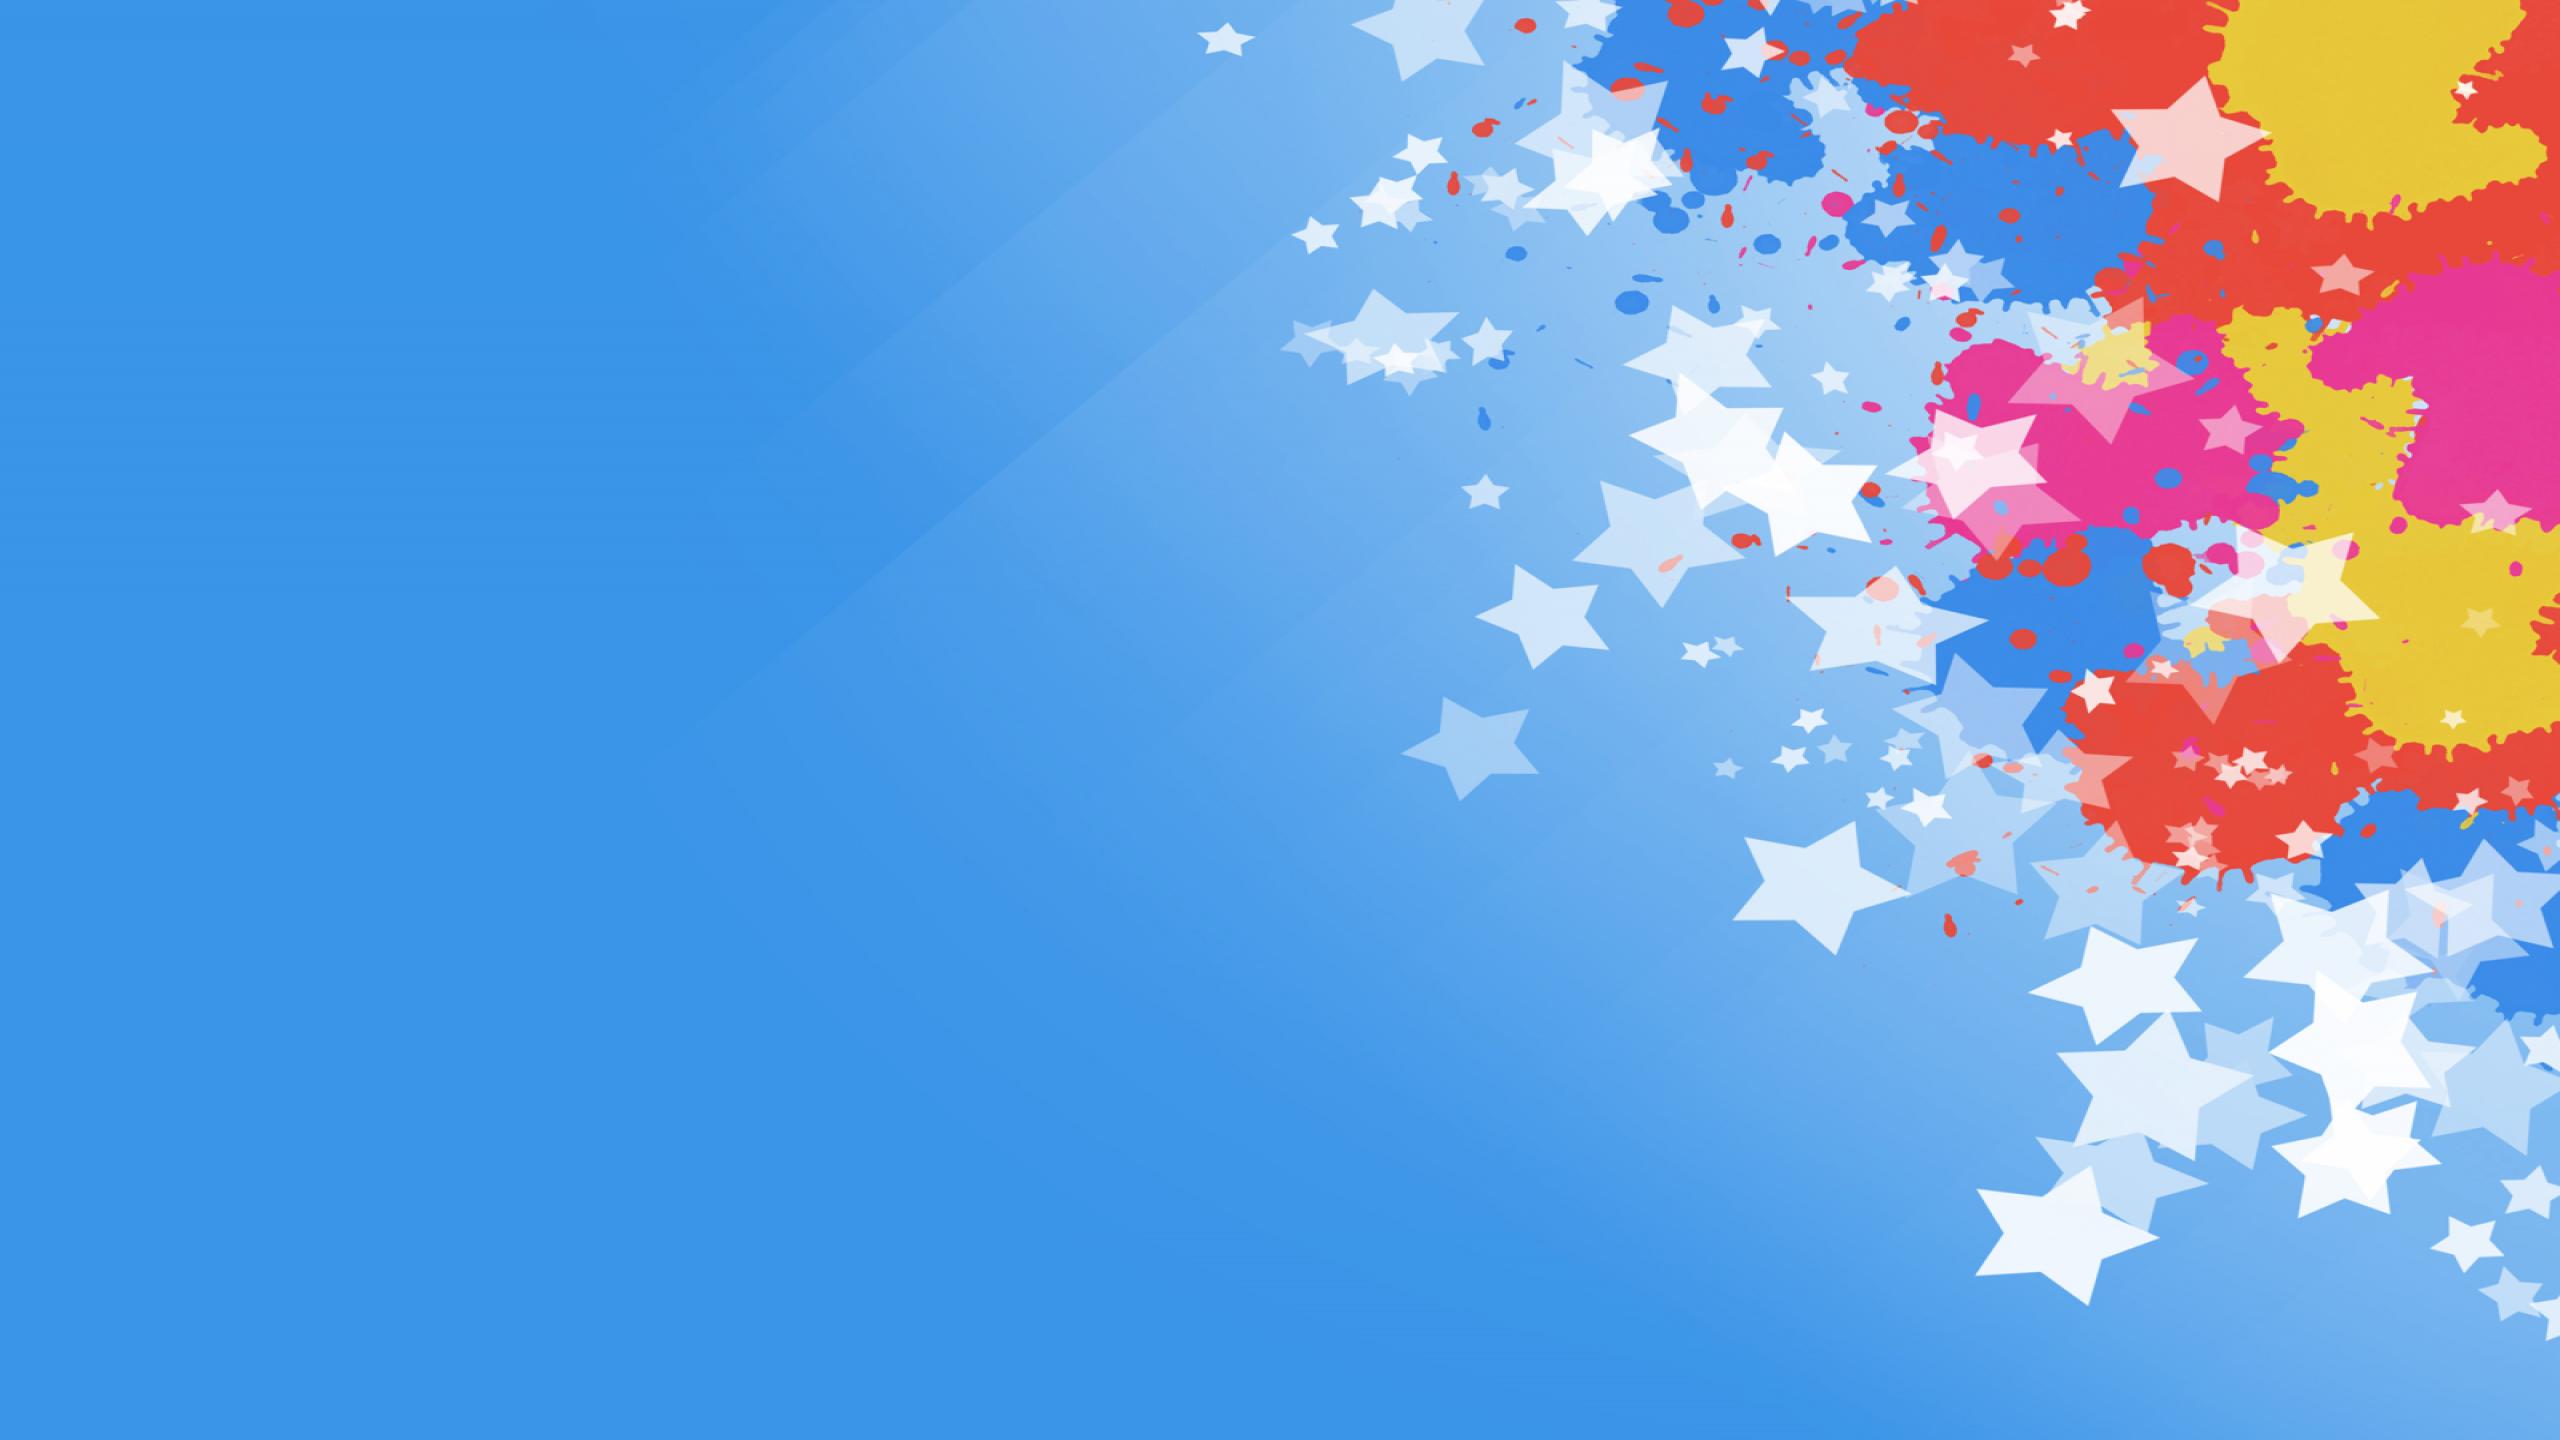 Celebration Backgrounds HD Wallpapers 2560x1440 Celebration Wallpapers